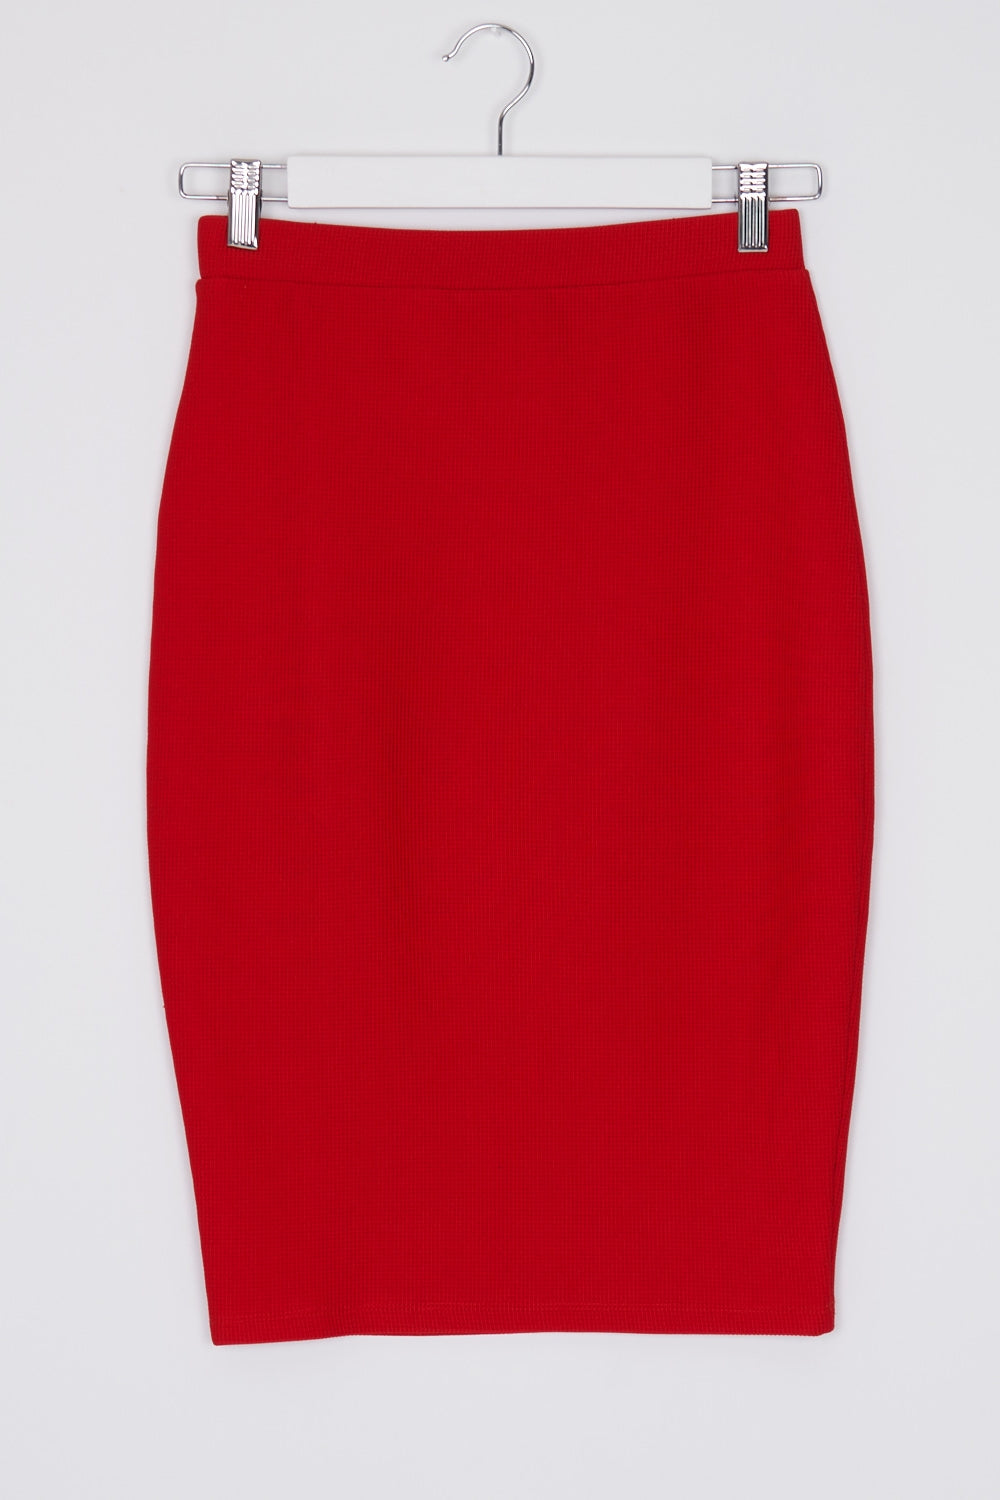 Atmos &amp; Here Red Pencil Skirt 8